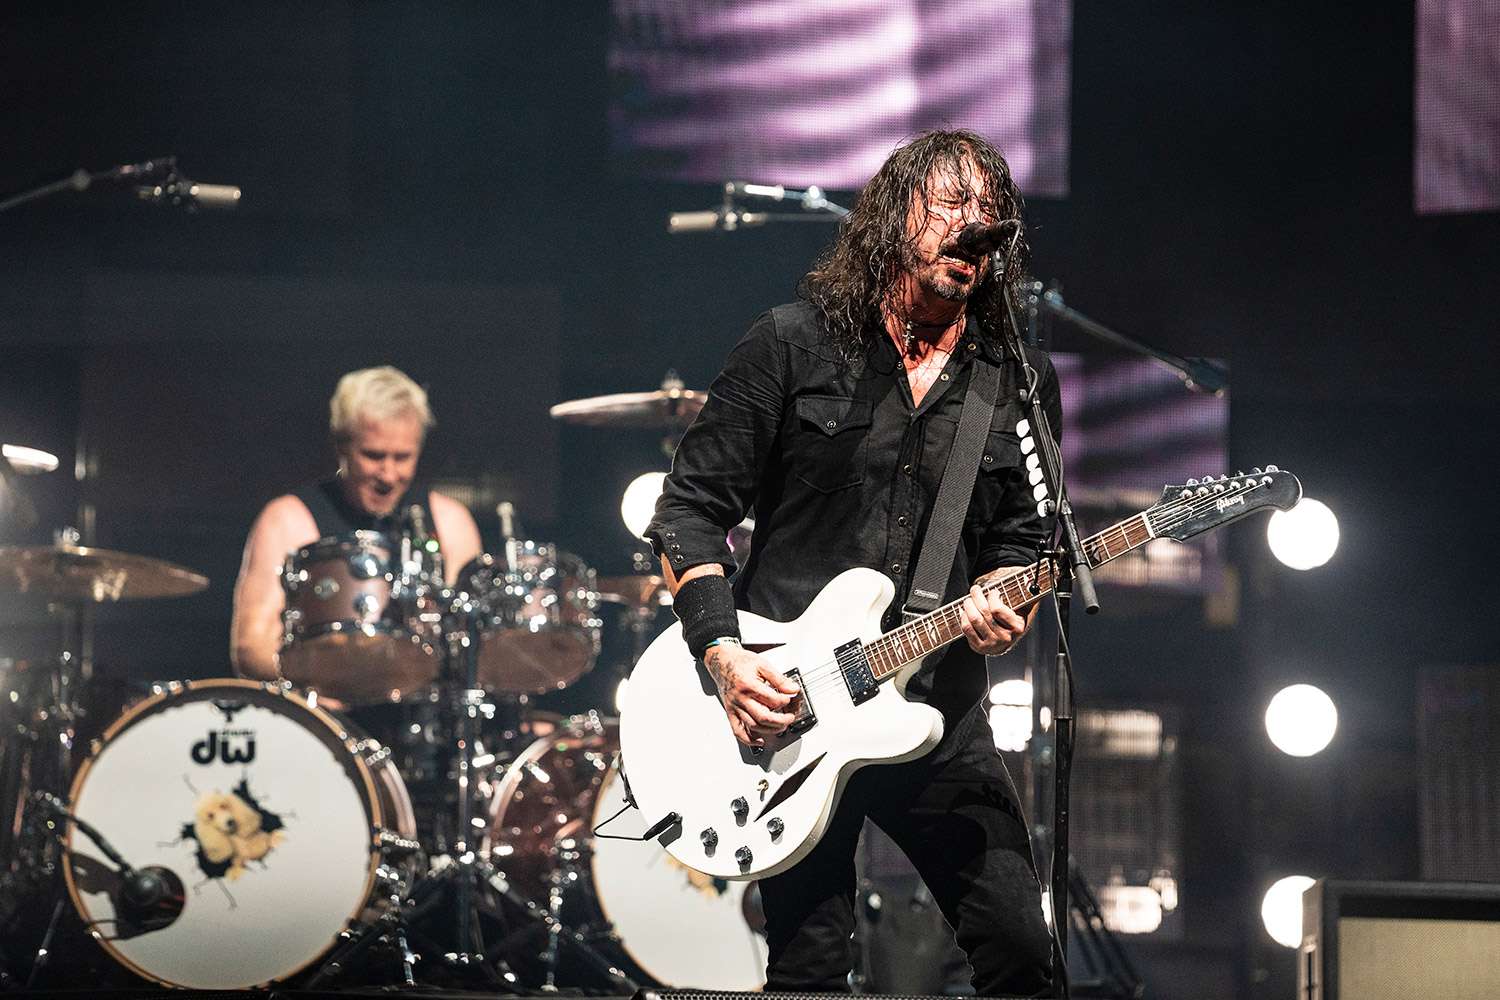 Foo Fighters Cut Citi Field Concert Short Due to 'Dangerous Weather': 'No Safe Way to Continue'